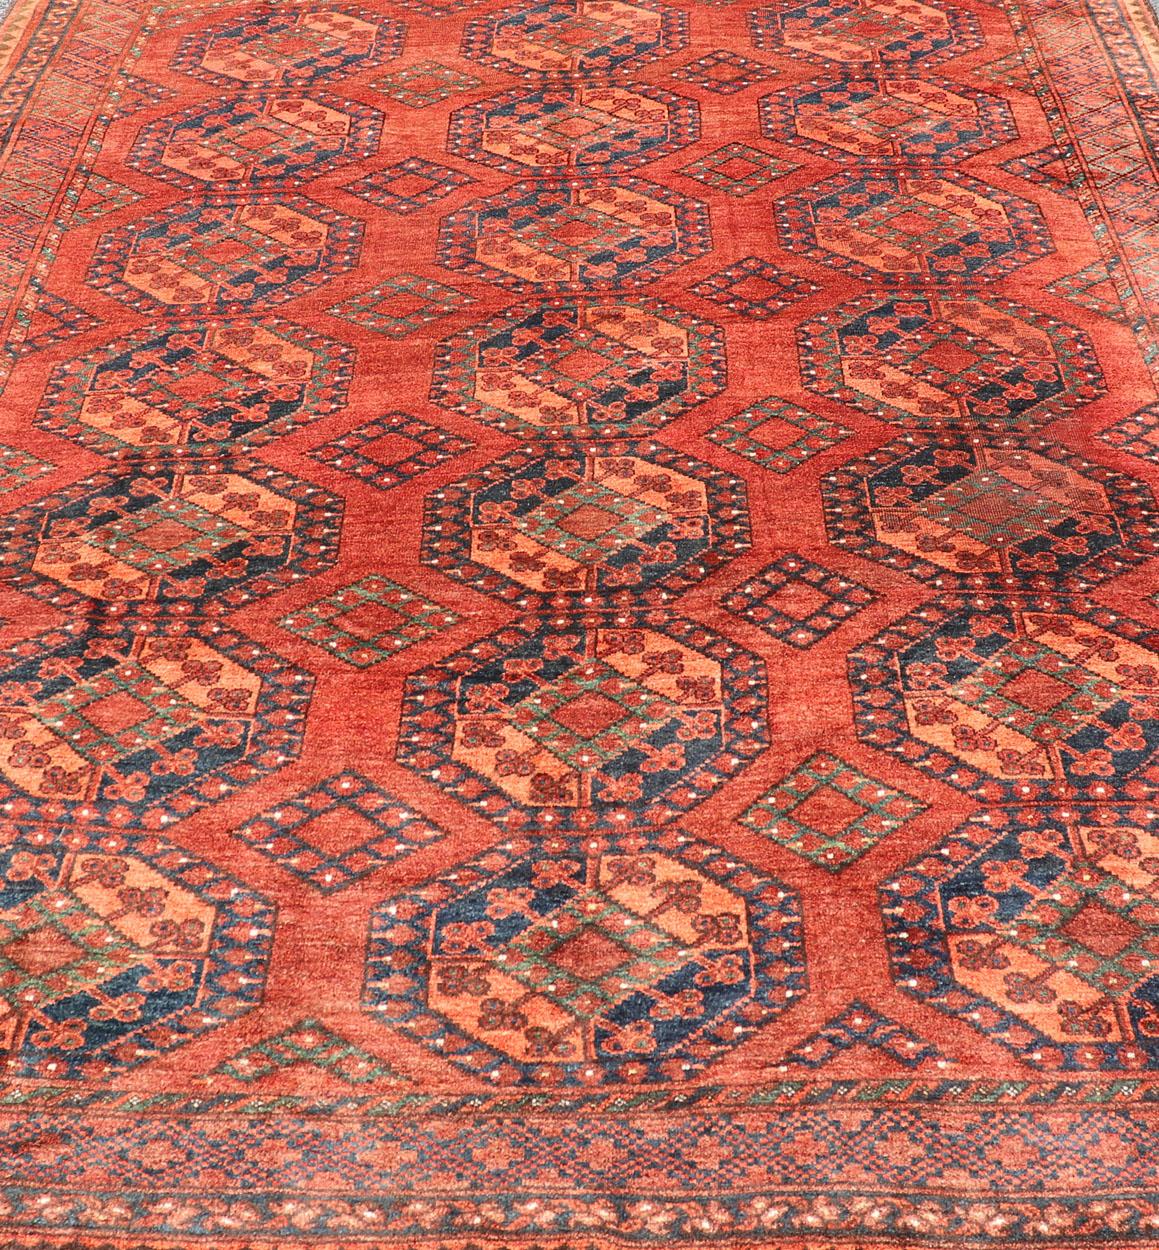 Early 20th Century Hand-Knotted Turkomen Ersari Rug in Wool with Gul Design For Sale 3